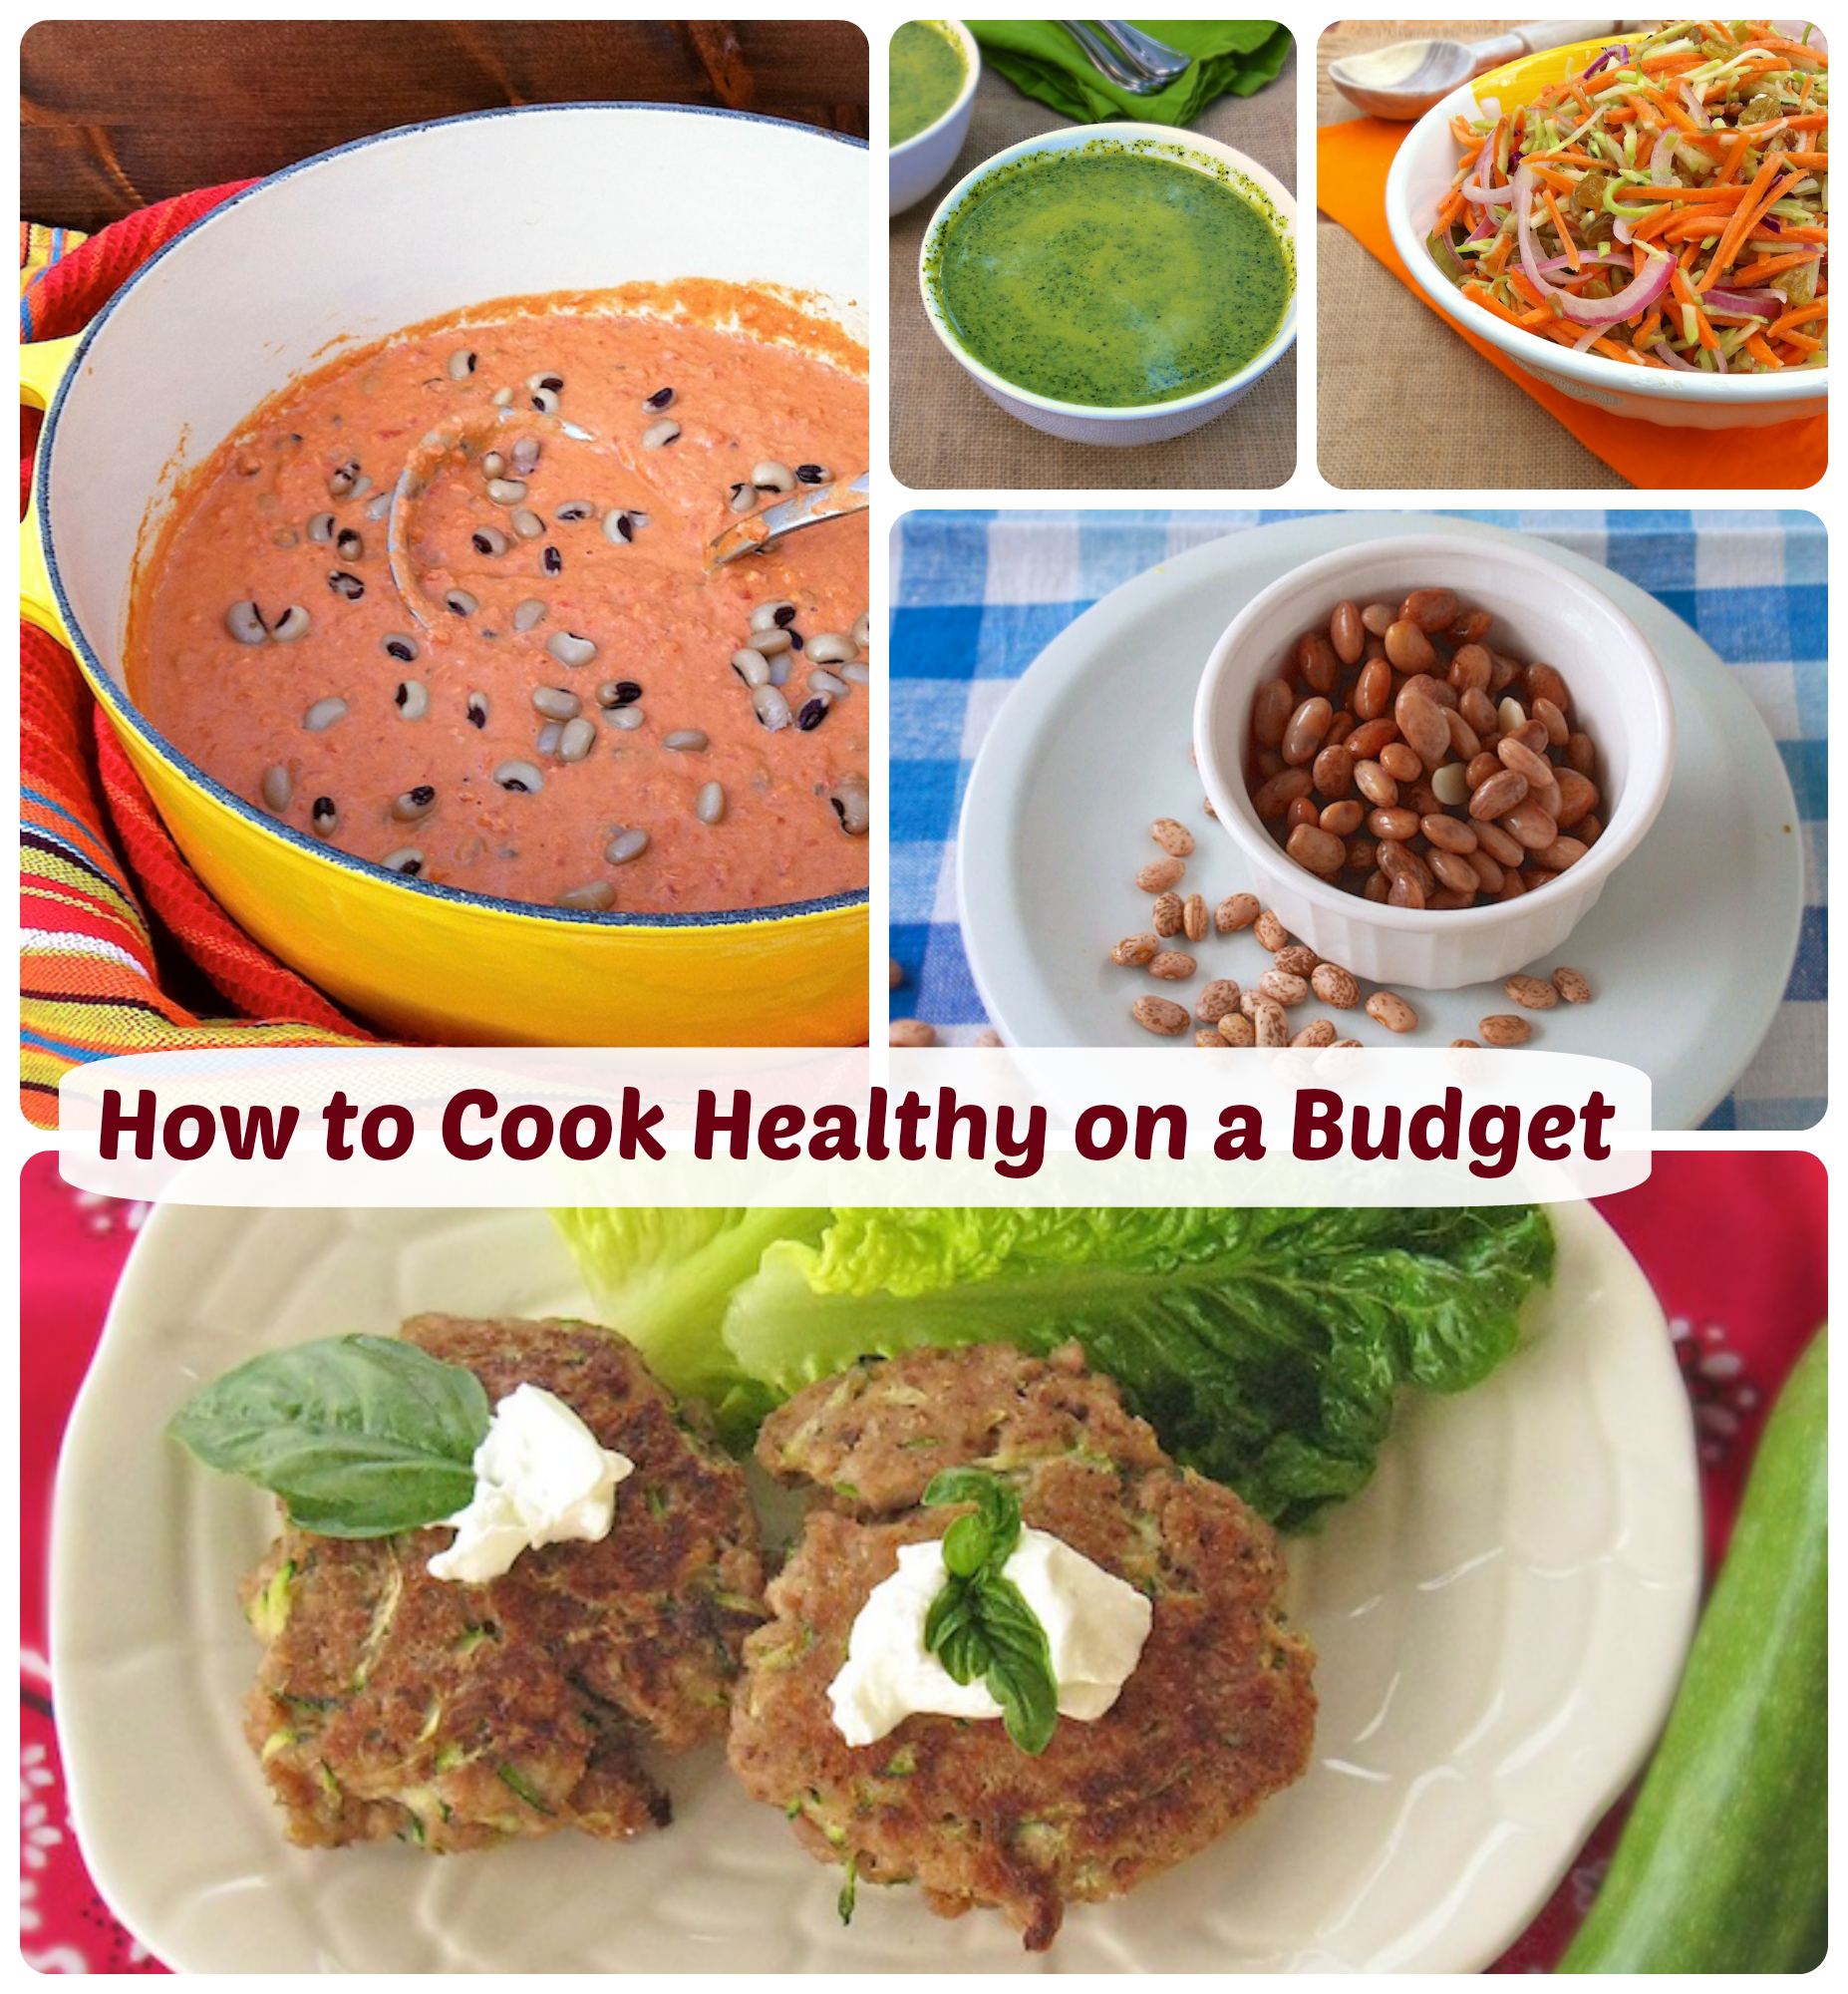 How to Cook Healthy on a Budget